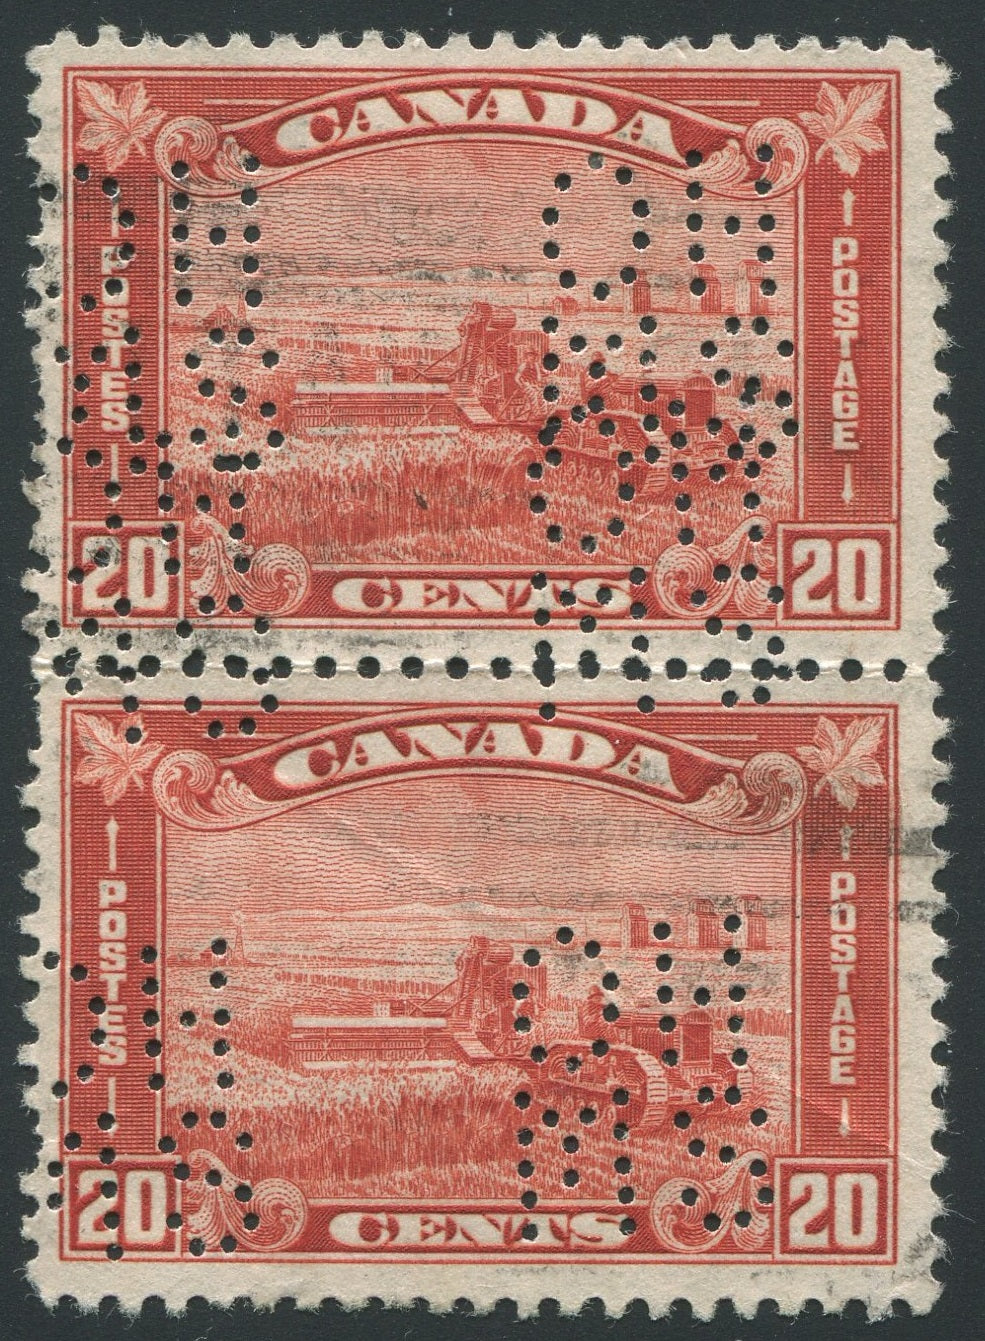 0219CA1804 - Canada OA175 &#39;A X&#39; - Used Pair - UNLISTED